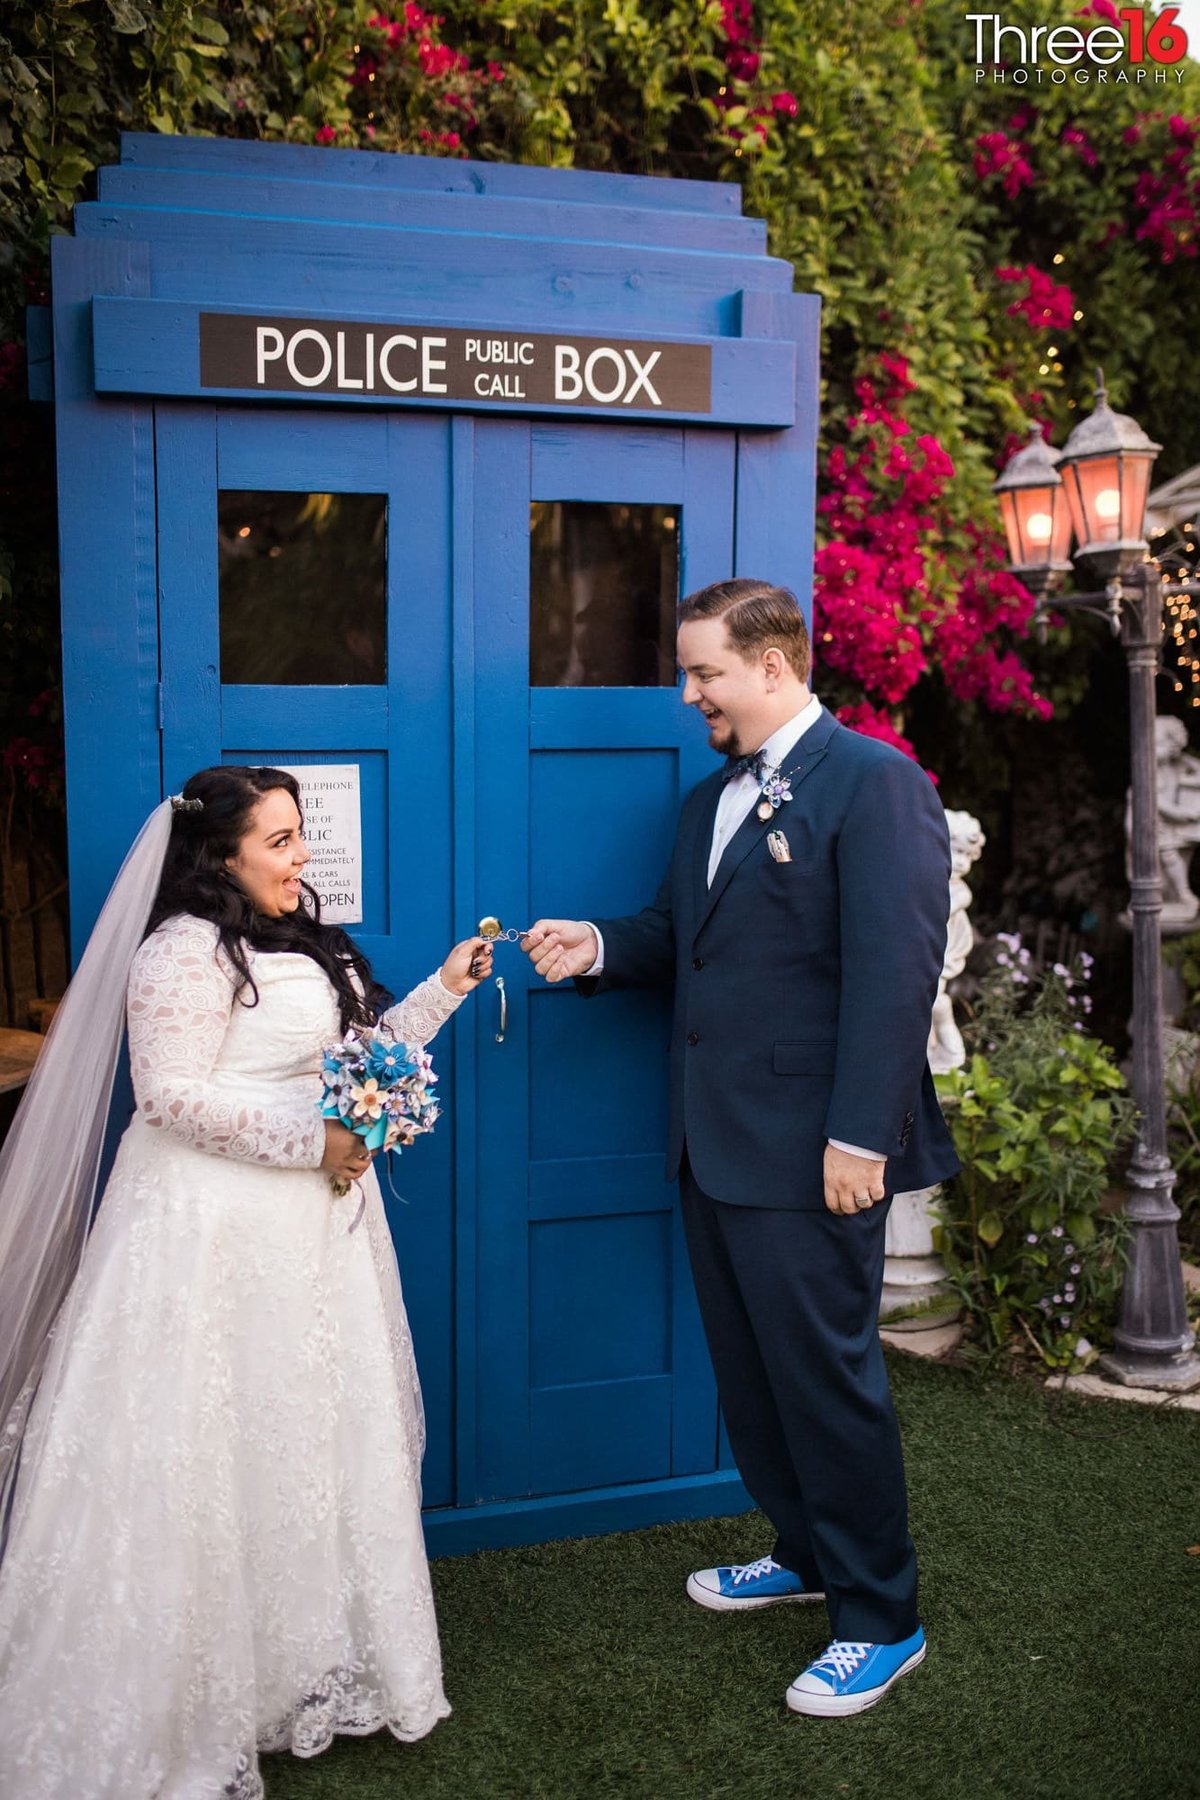 Bride and Groom about to open the doors to a public police box